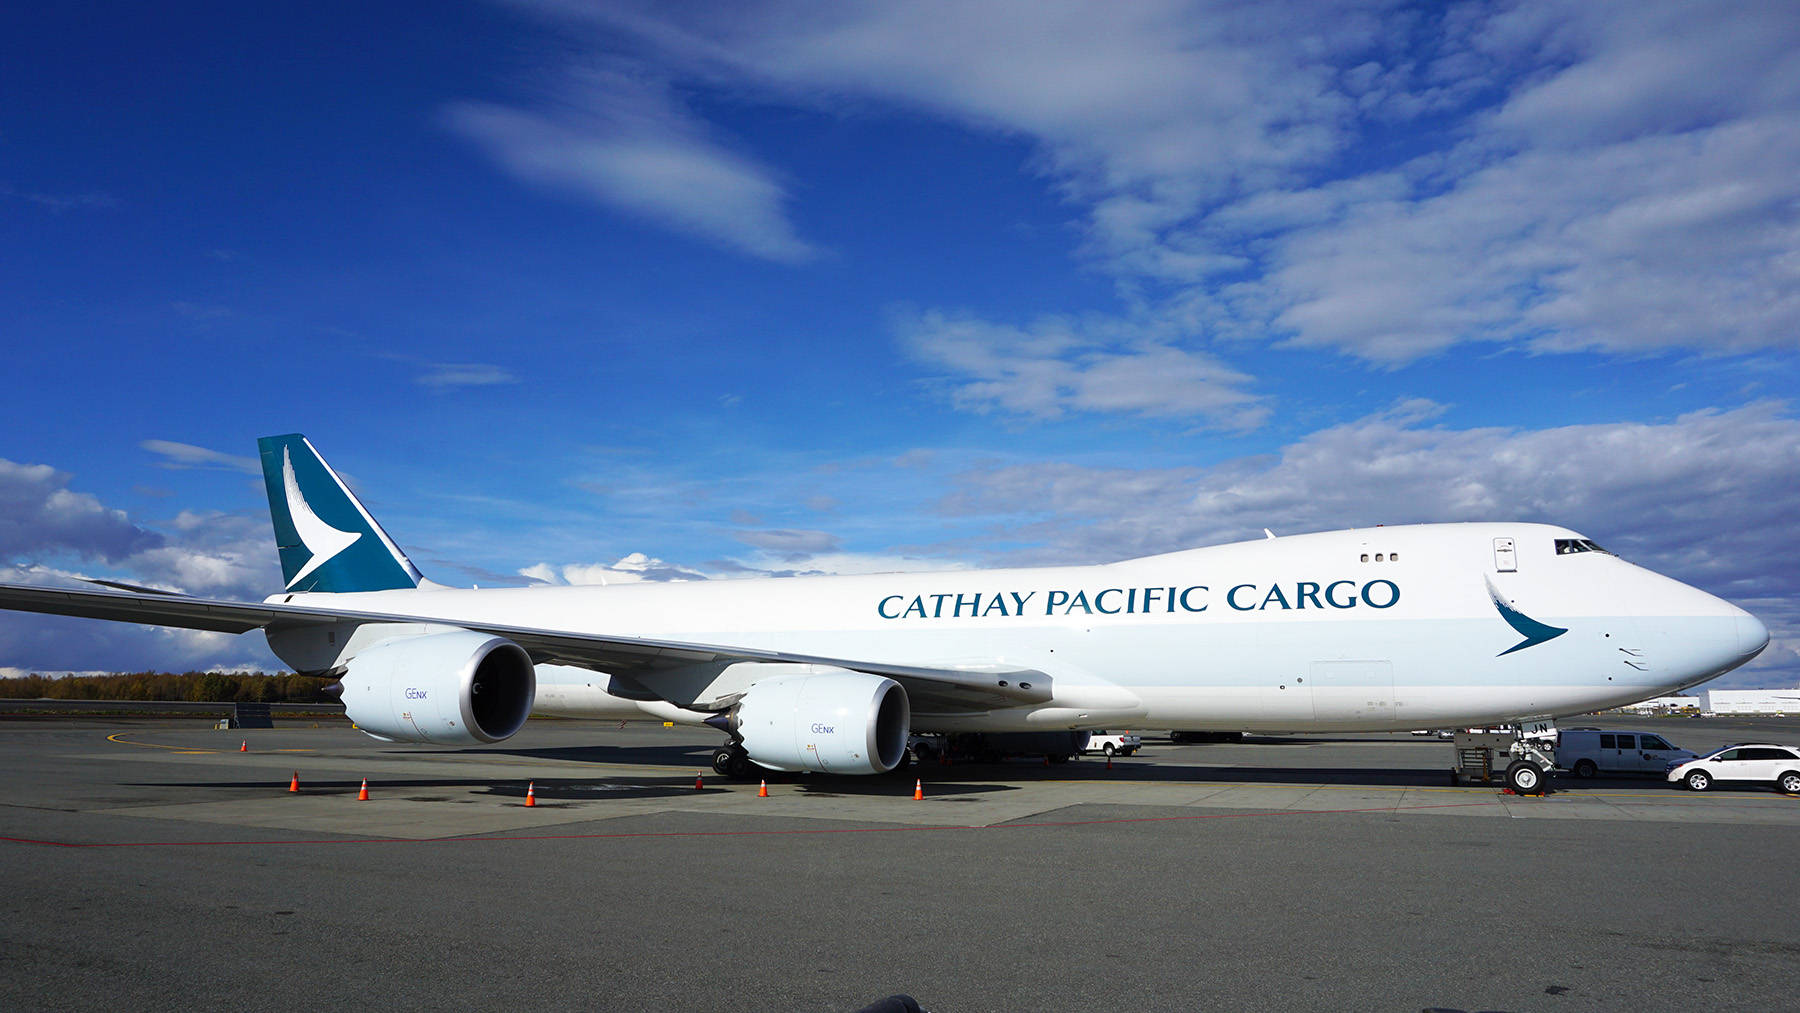 Cathaypacific White Cargo Would Be Translated As 